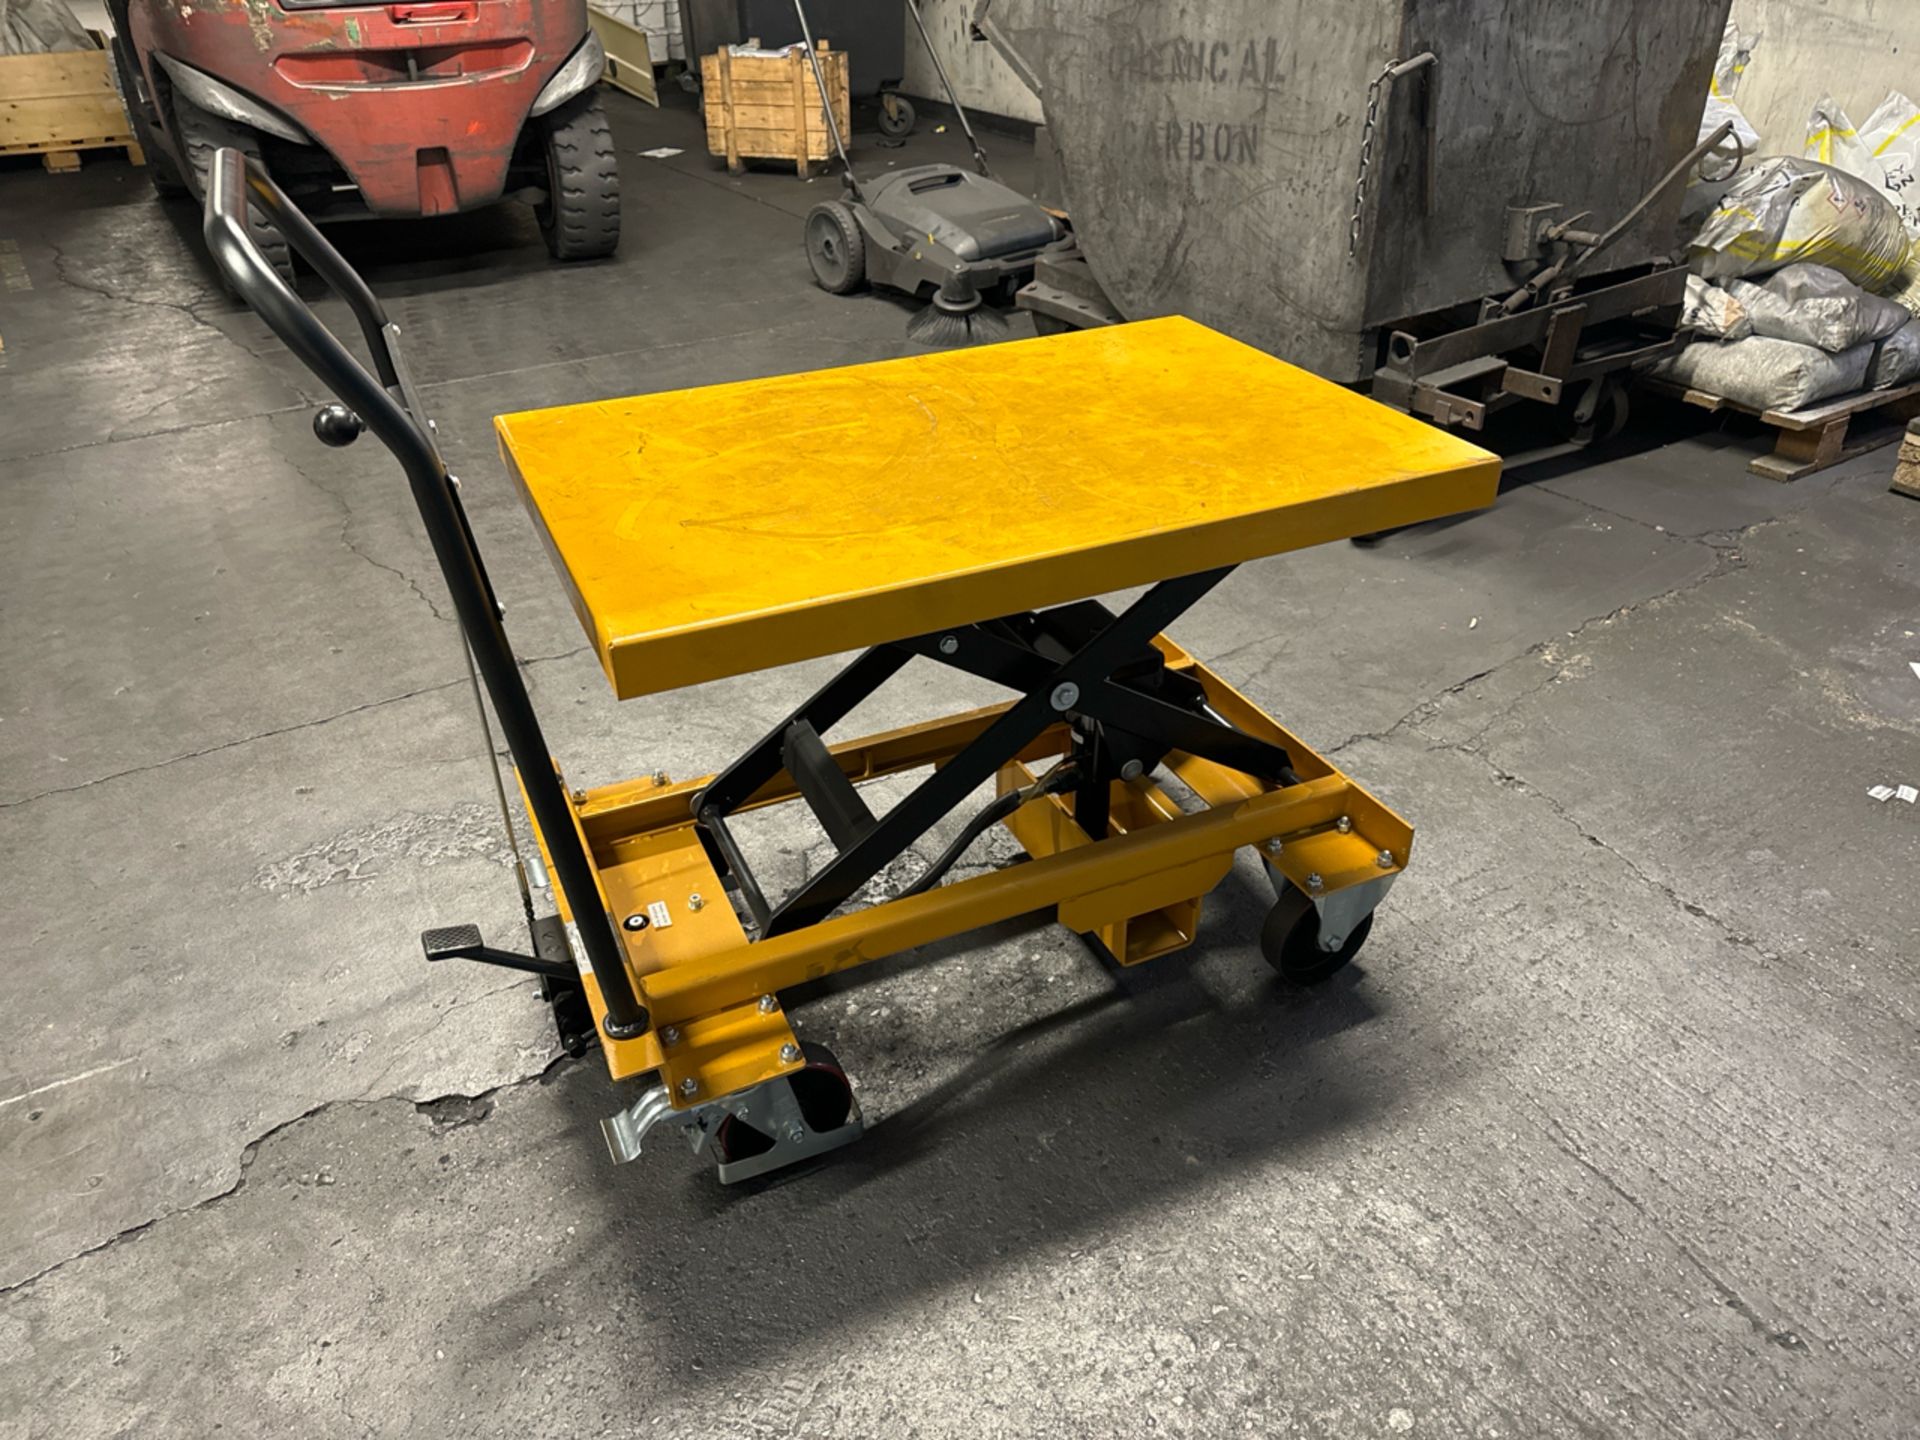 500kg capacity lifting table - Image 4 of 5